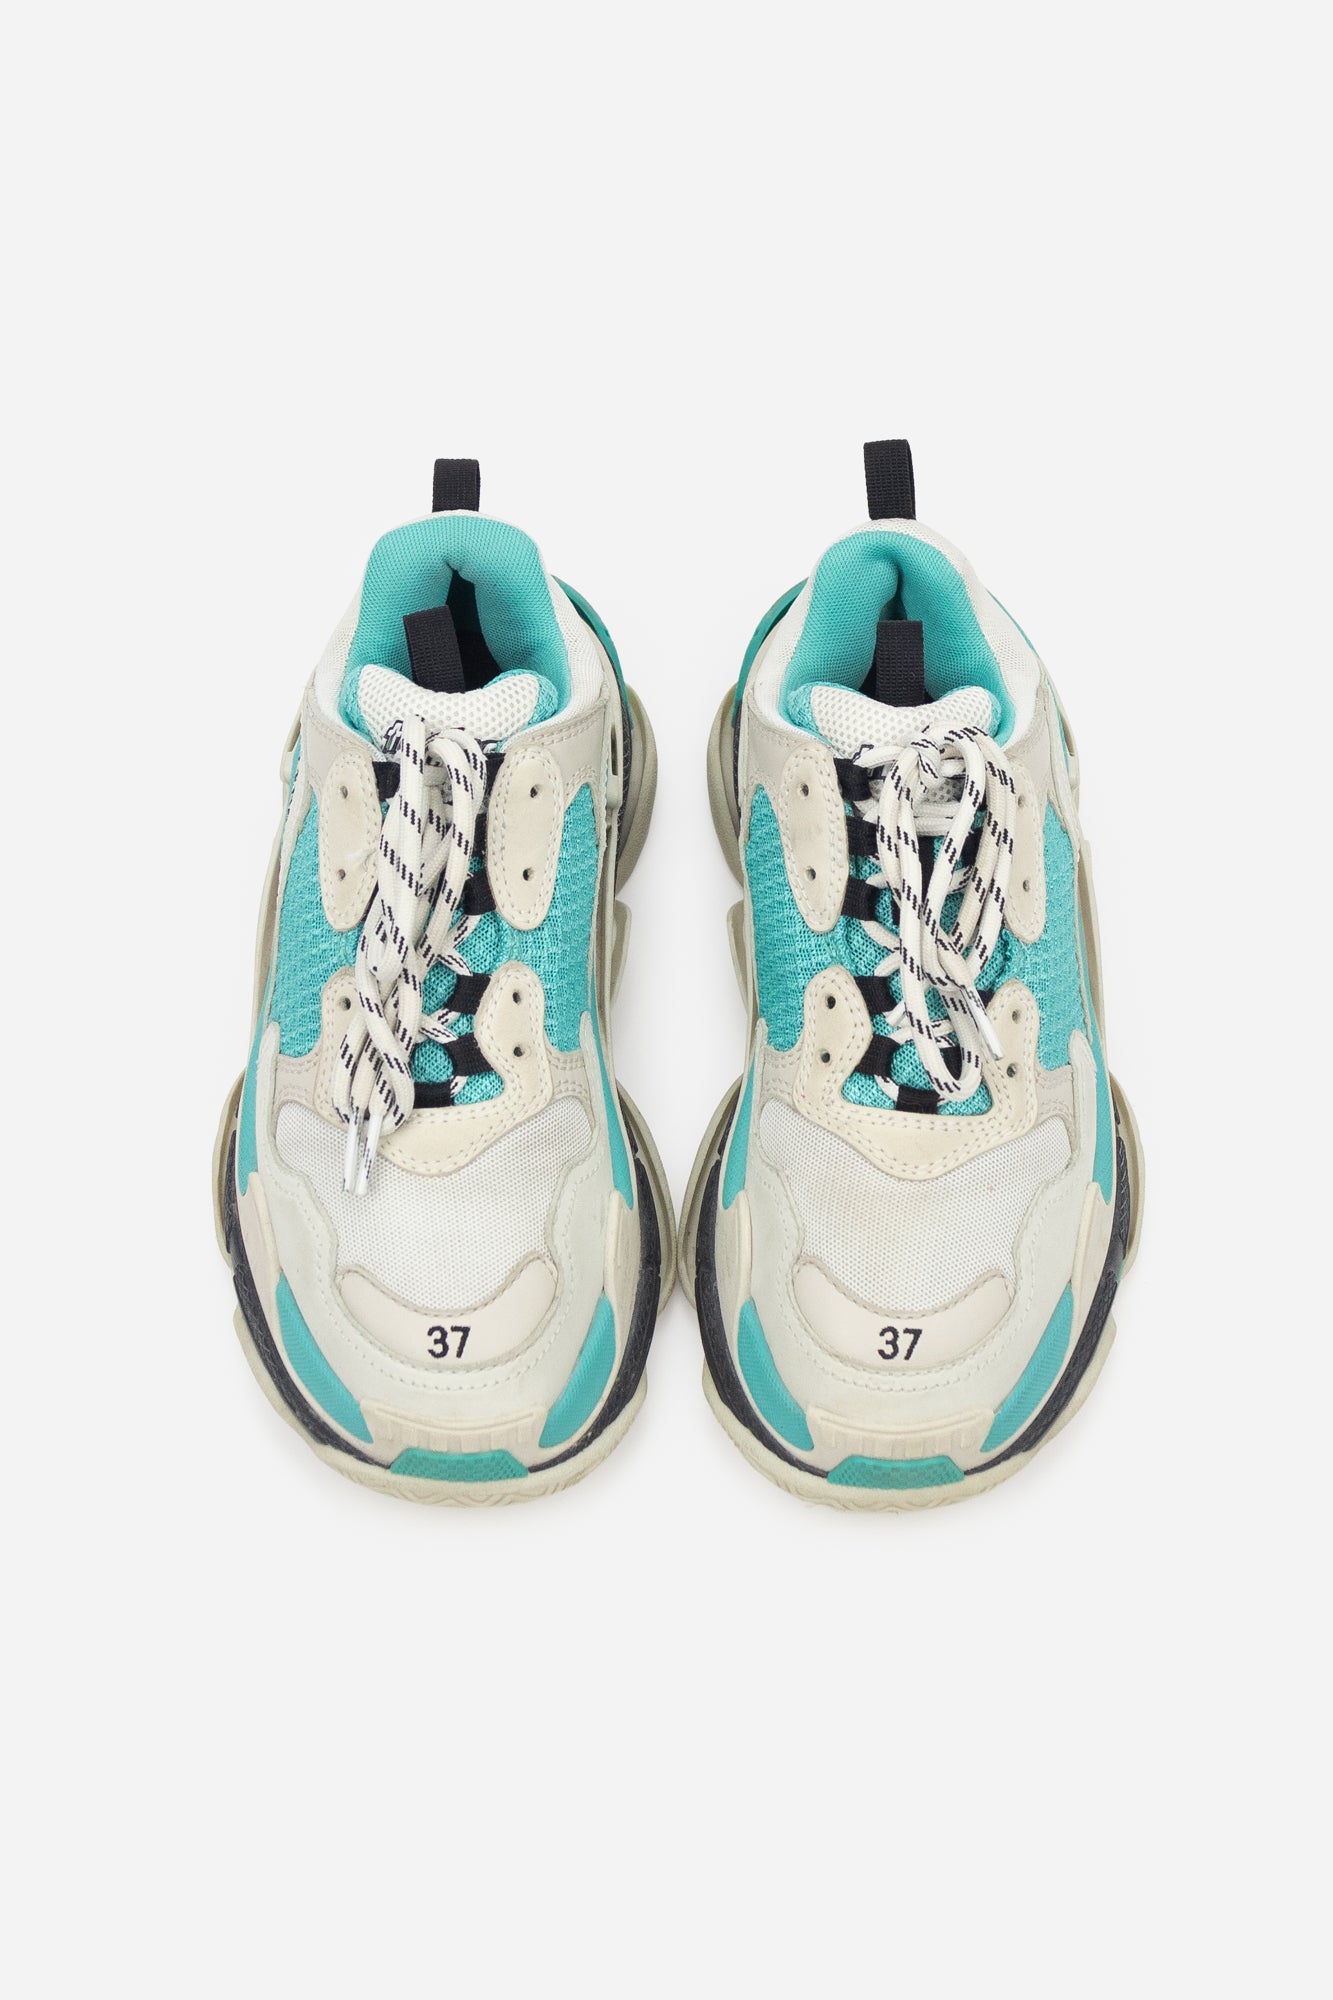 Teal and White Triple S Chunky Sneakers